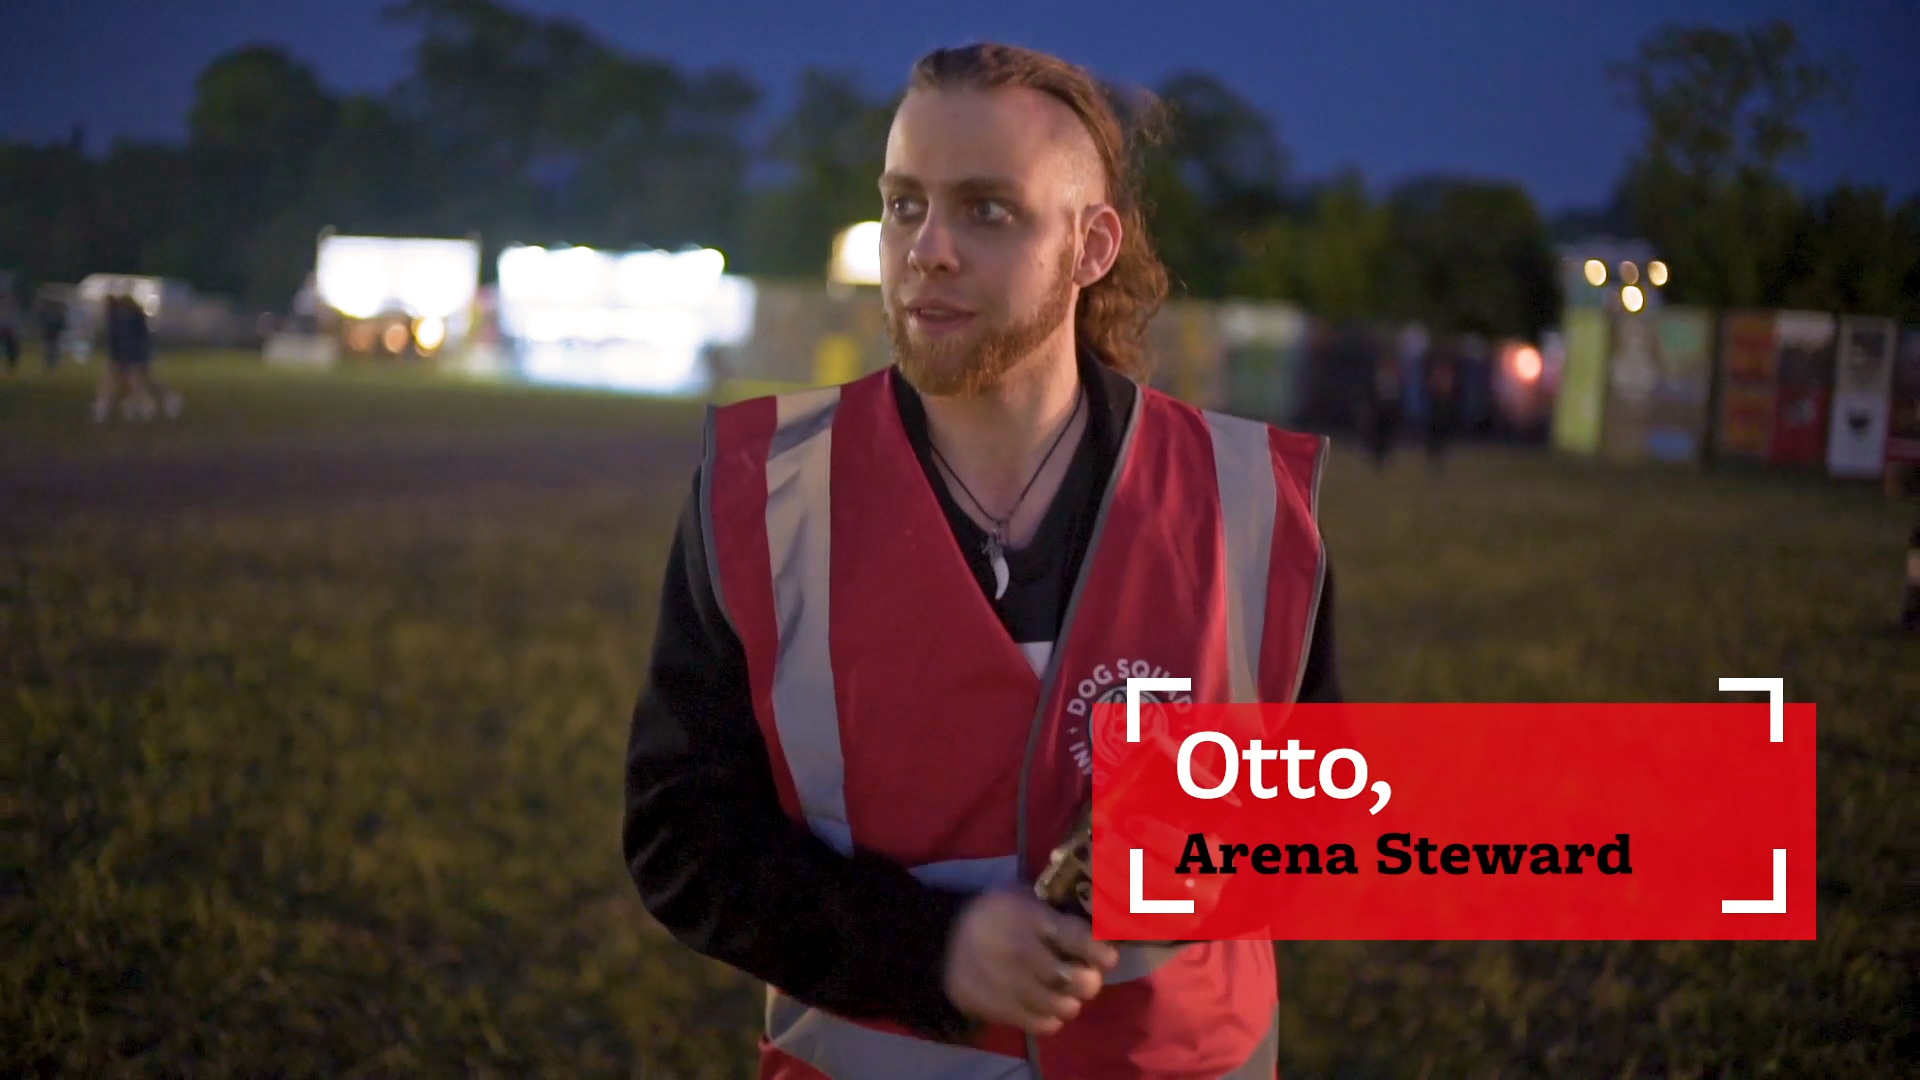 Otto an Arena Steward volunteering with Hotbox Events at Download Festival!